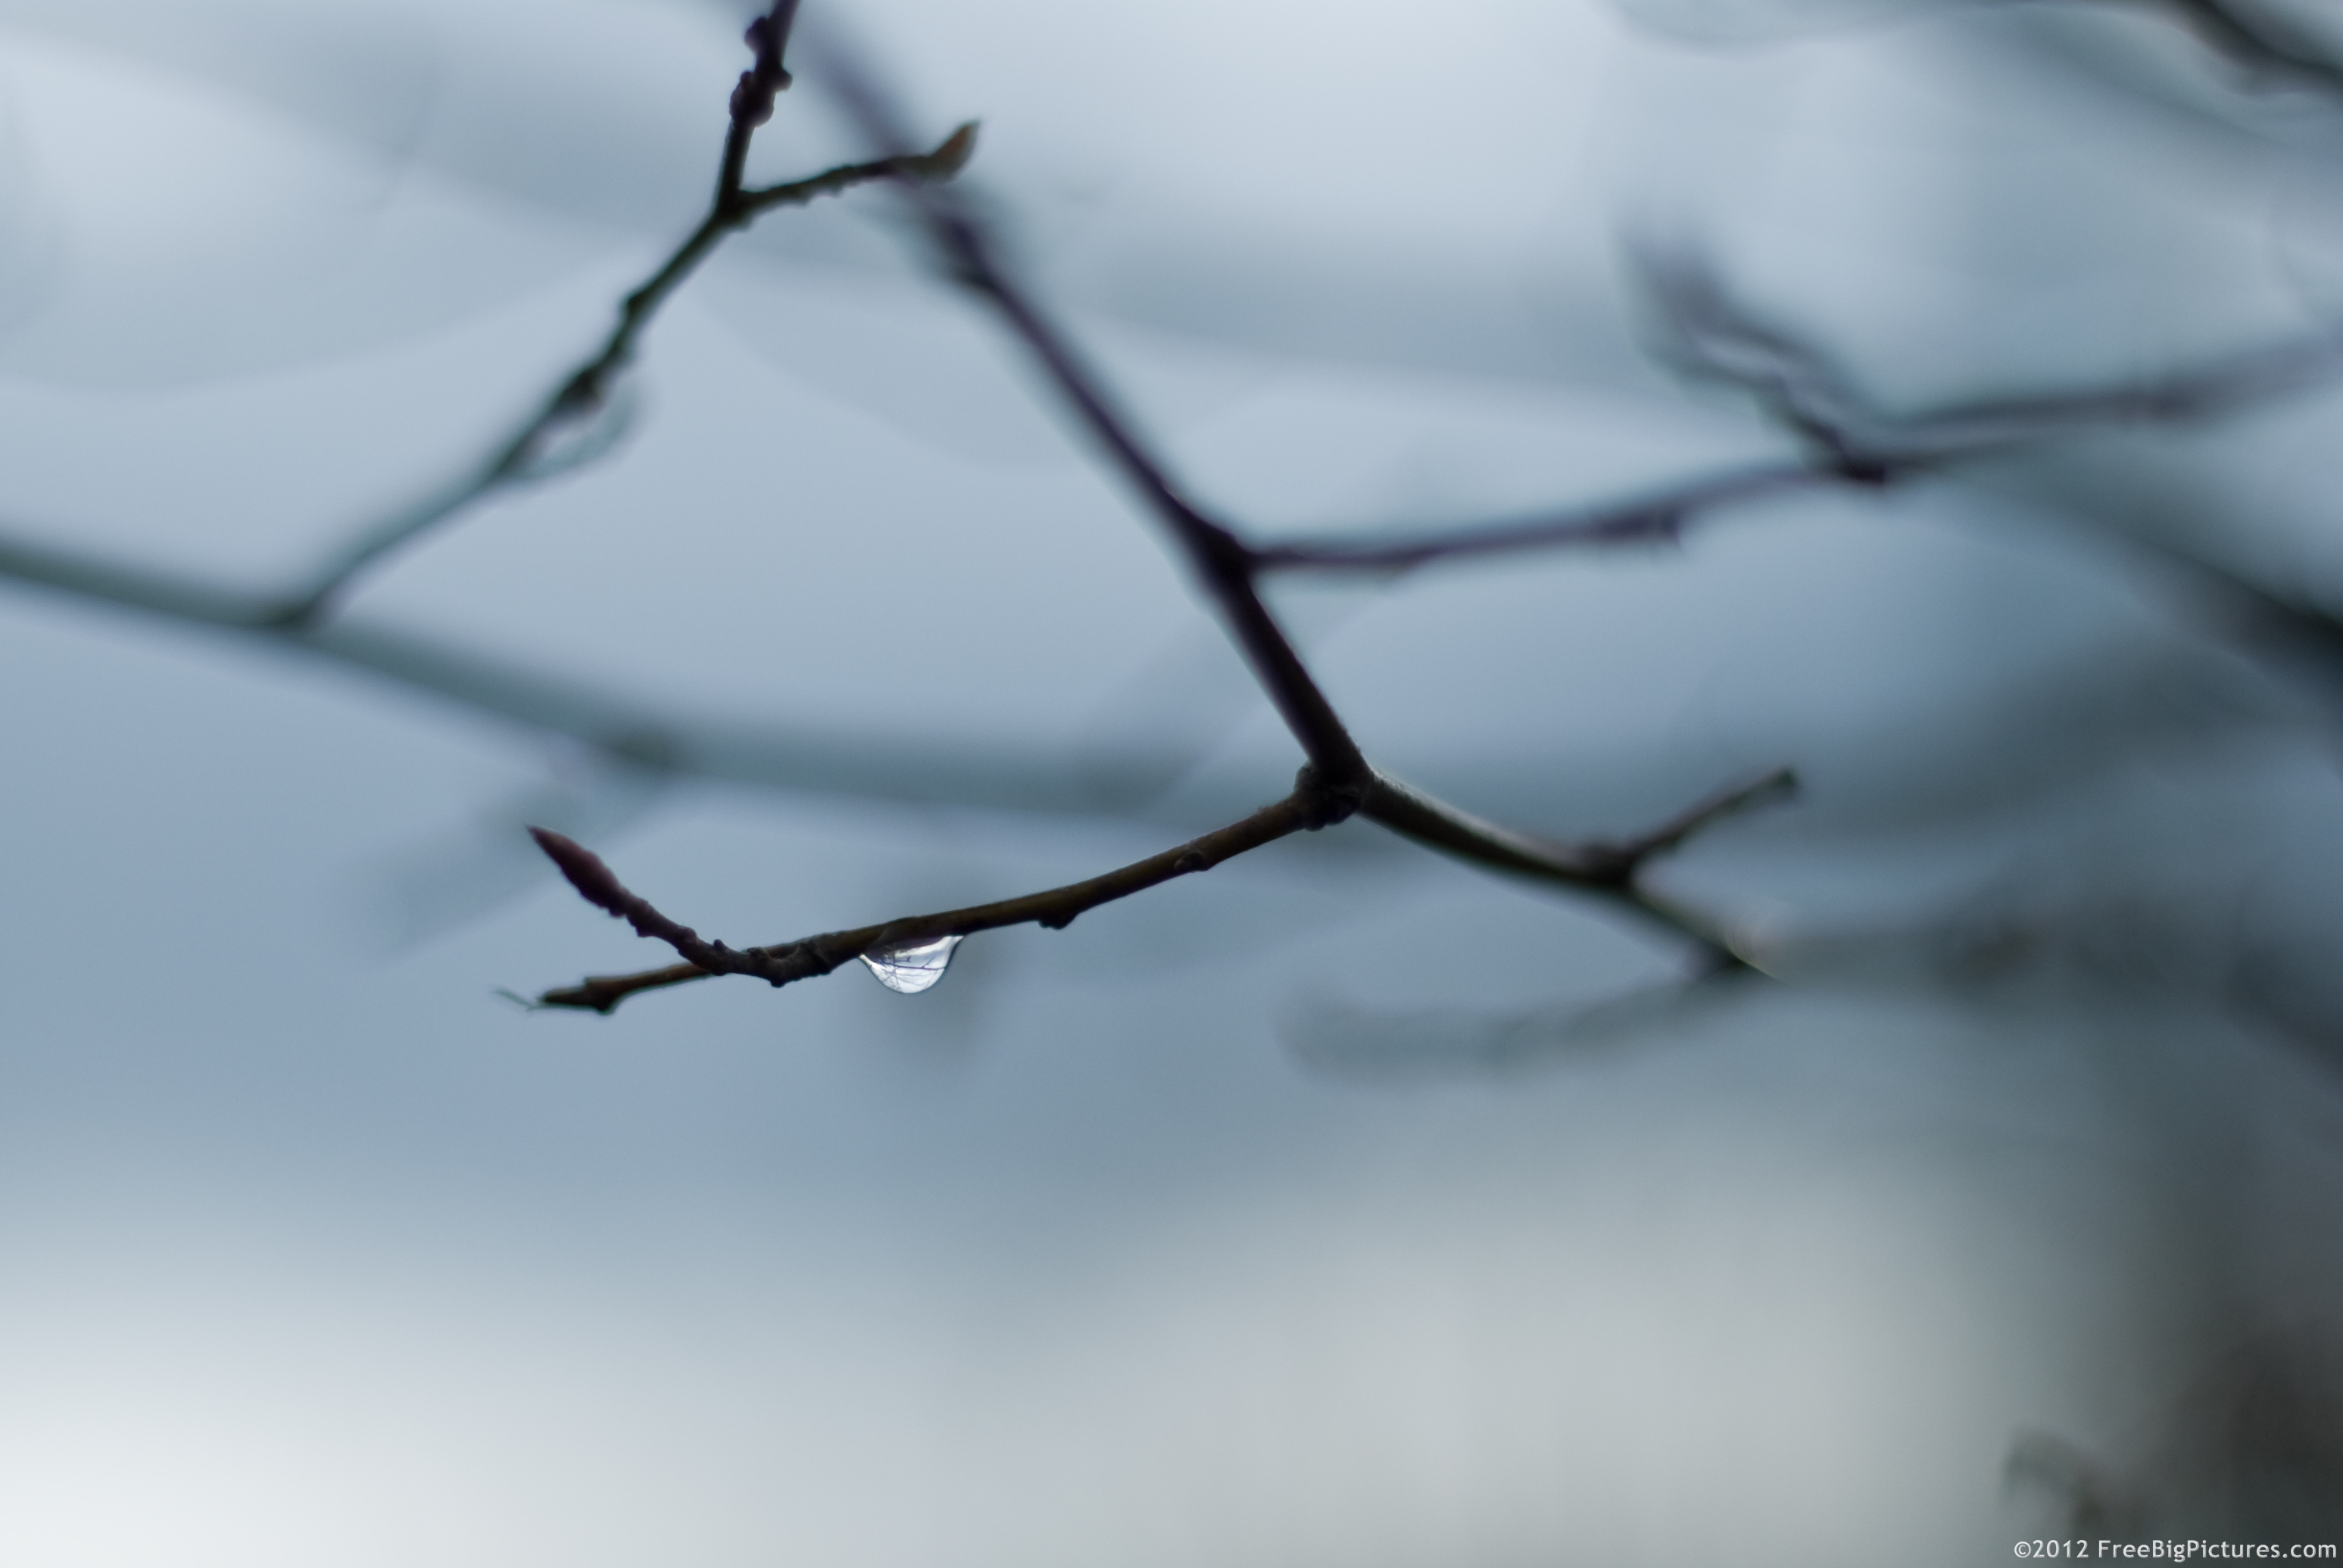 Raindrop hanging on a branch in spring